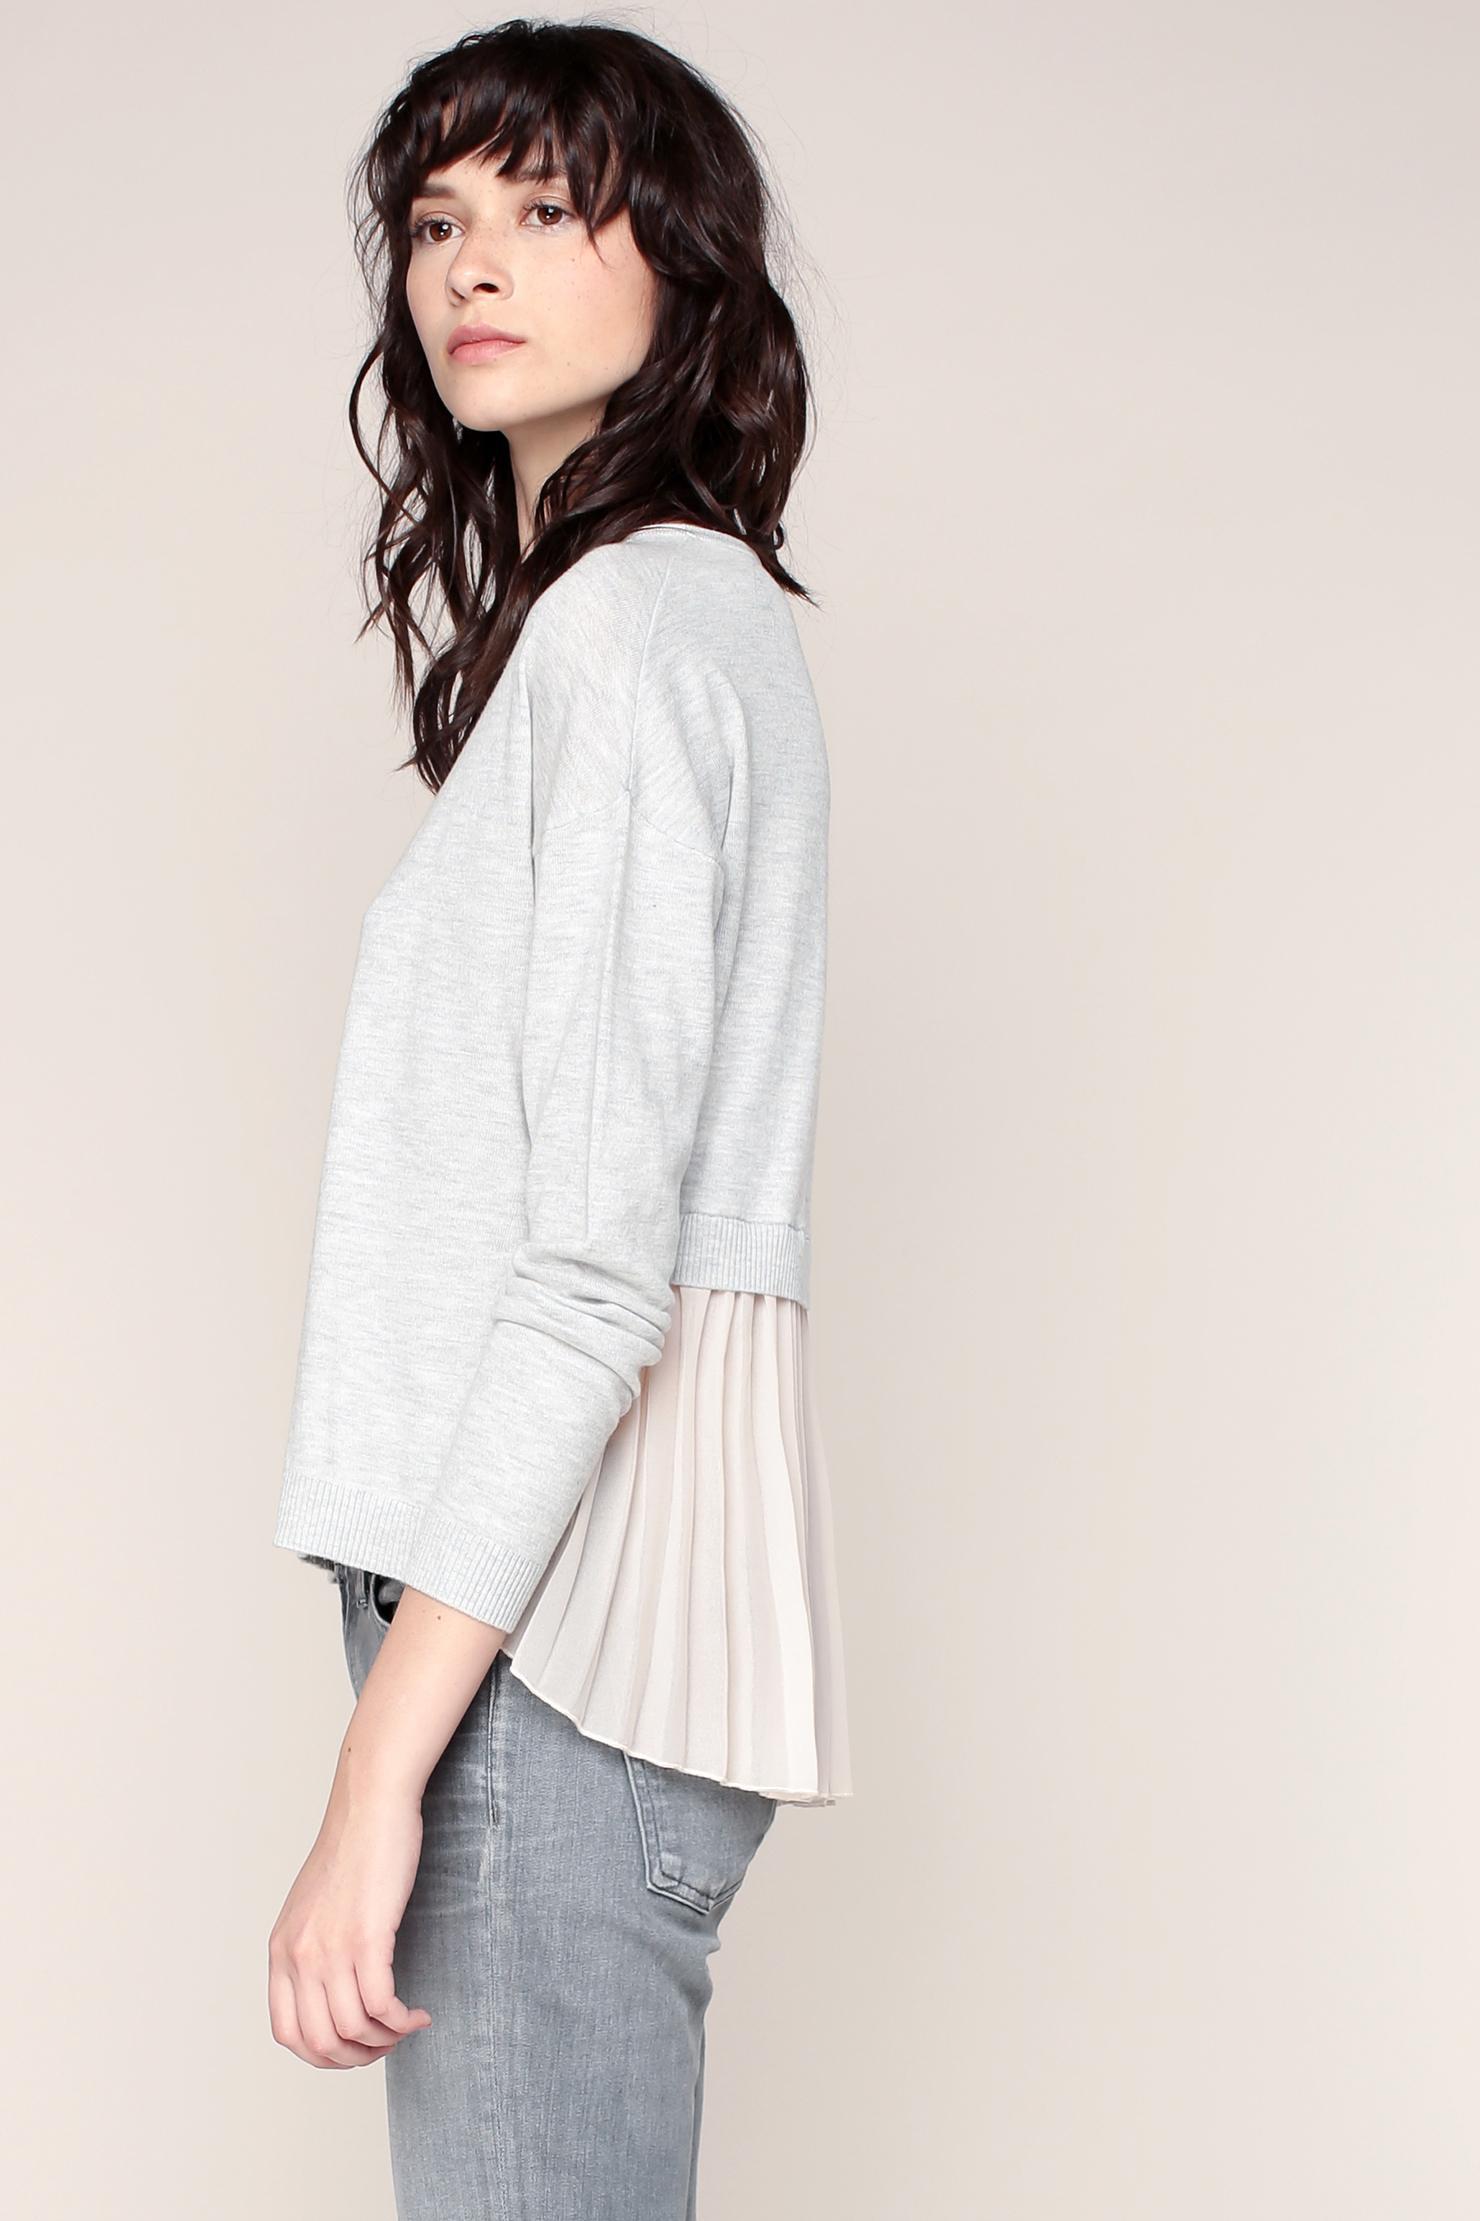 Lyst - Max&Co. Top in Gray